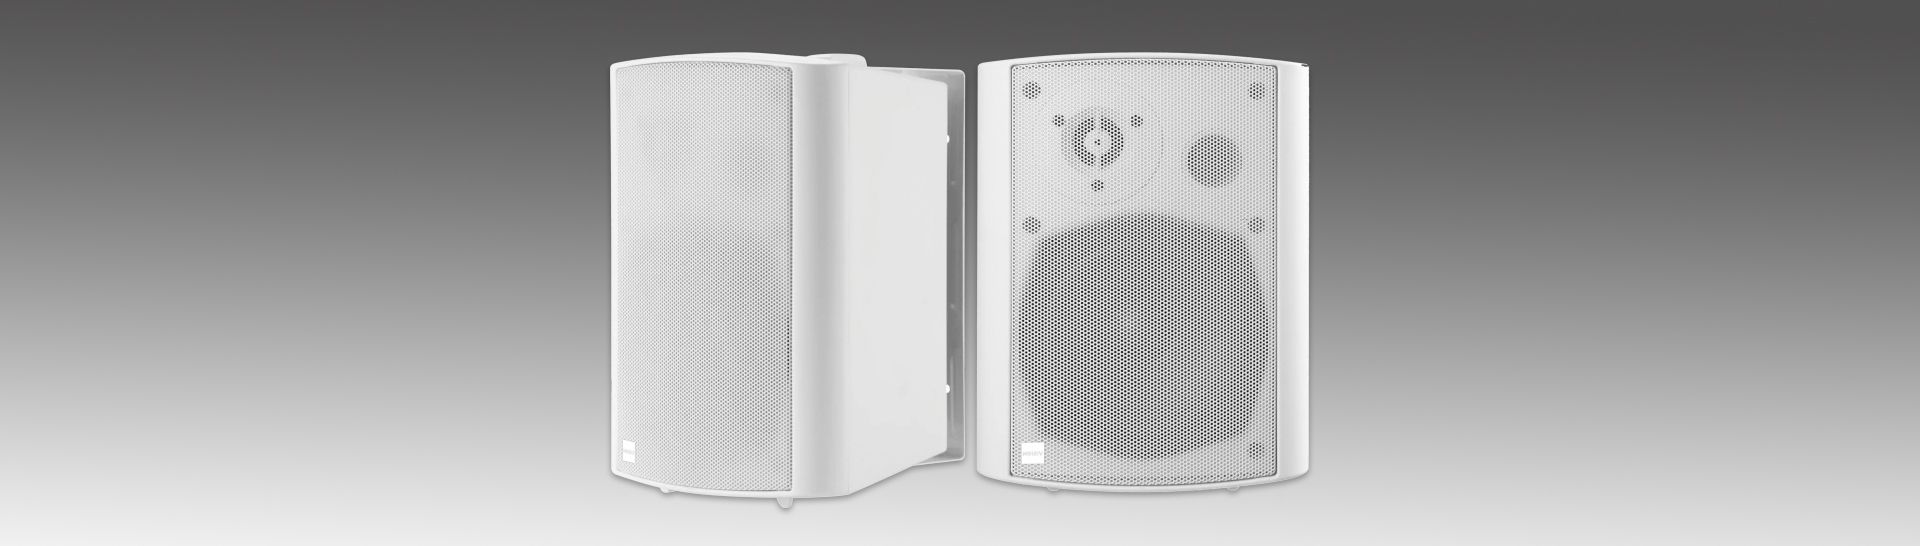 Techconnect Passive speakers from Projectorpoint